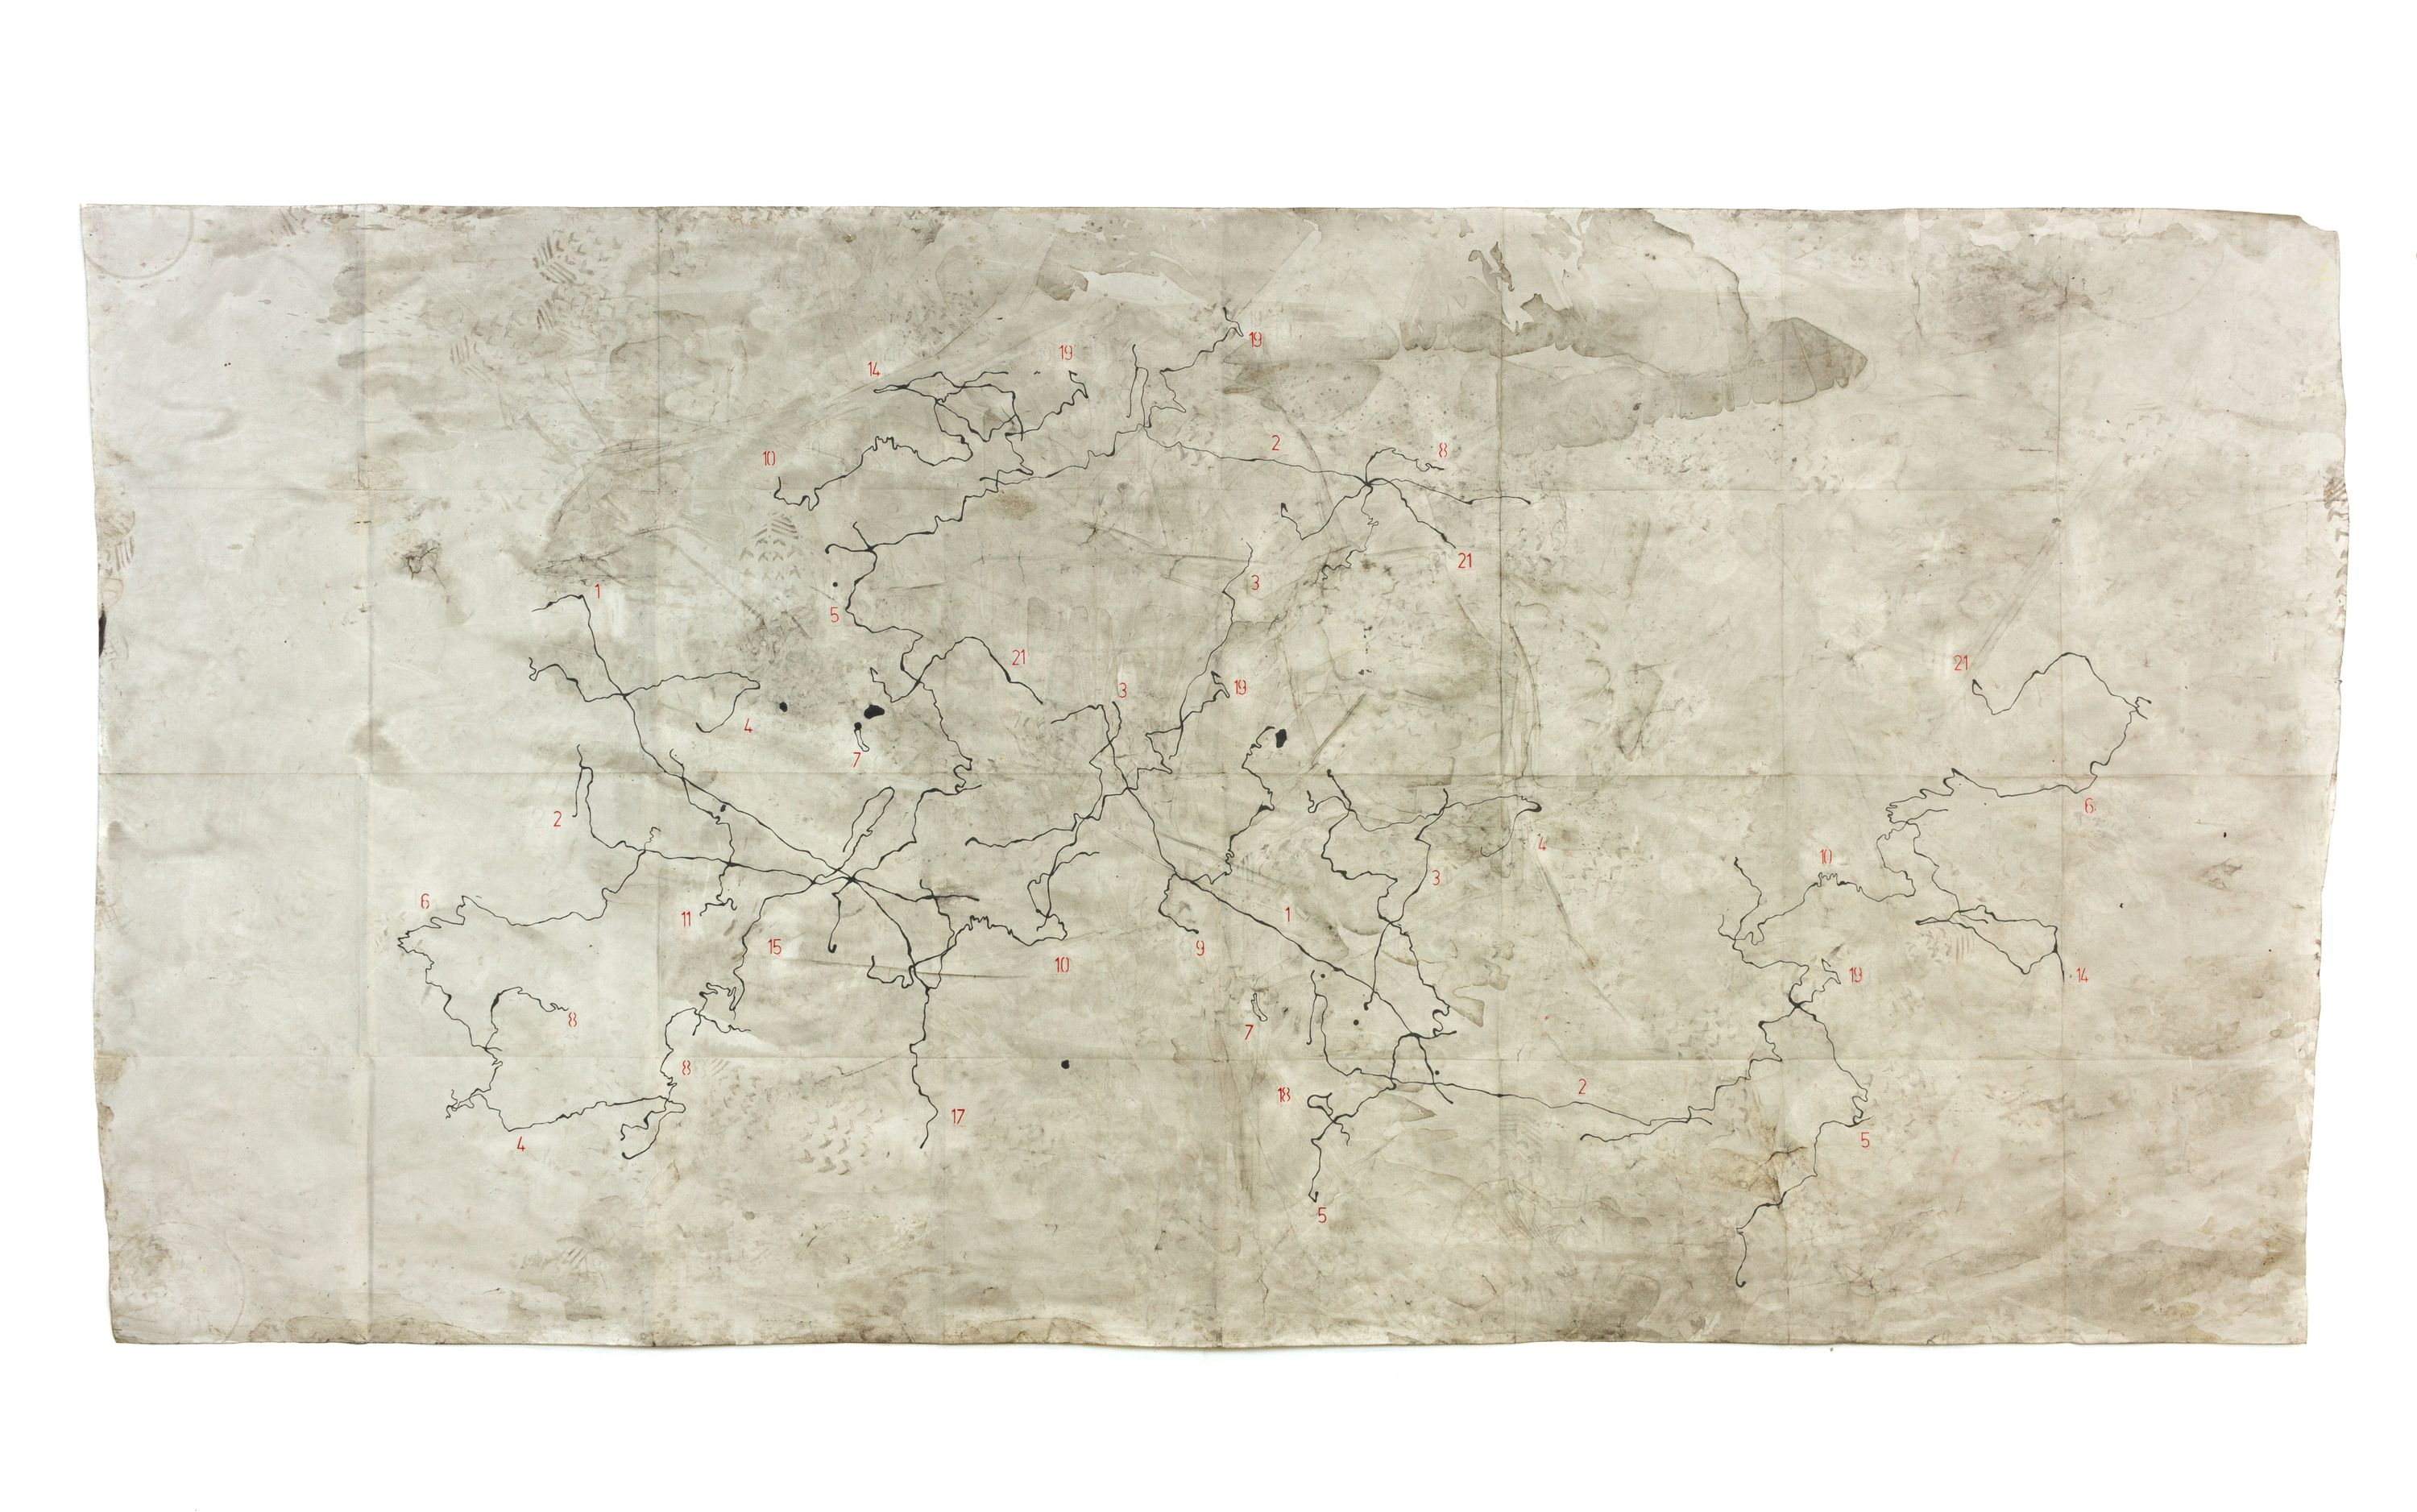 Impossible territory III (Grand Tour 2020), 2021, mixed media on paper, 150x300 cm